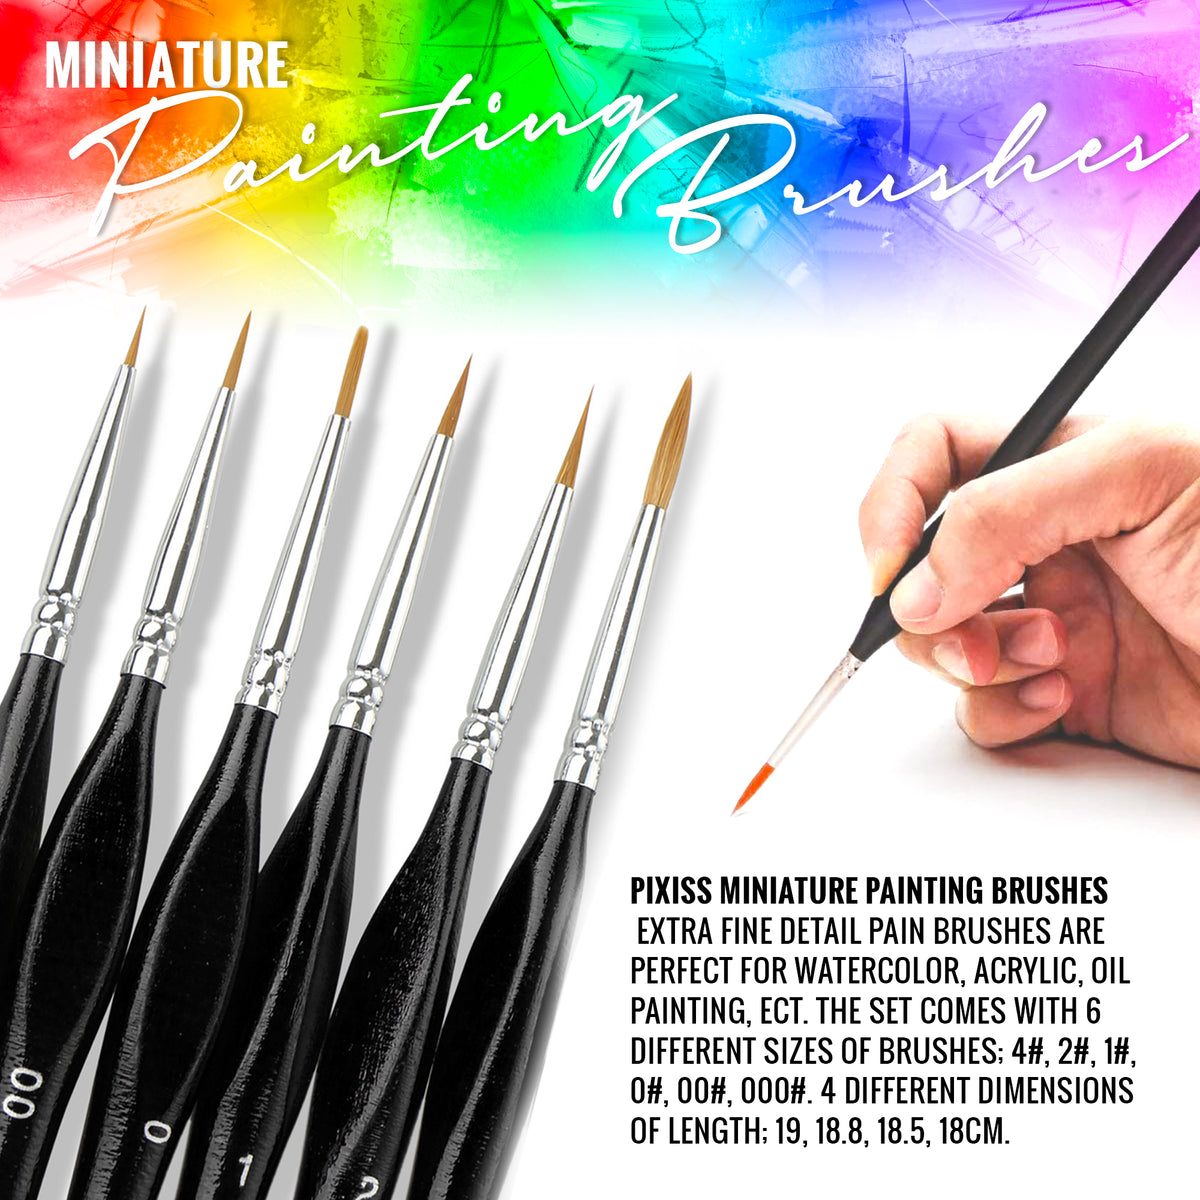 PIXISS Miniature Brushes with Precision Crafting Knife Bundle – Pixiss